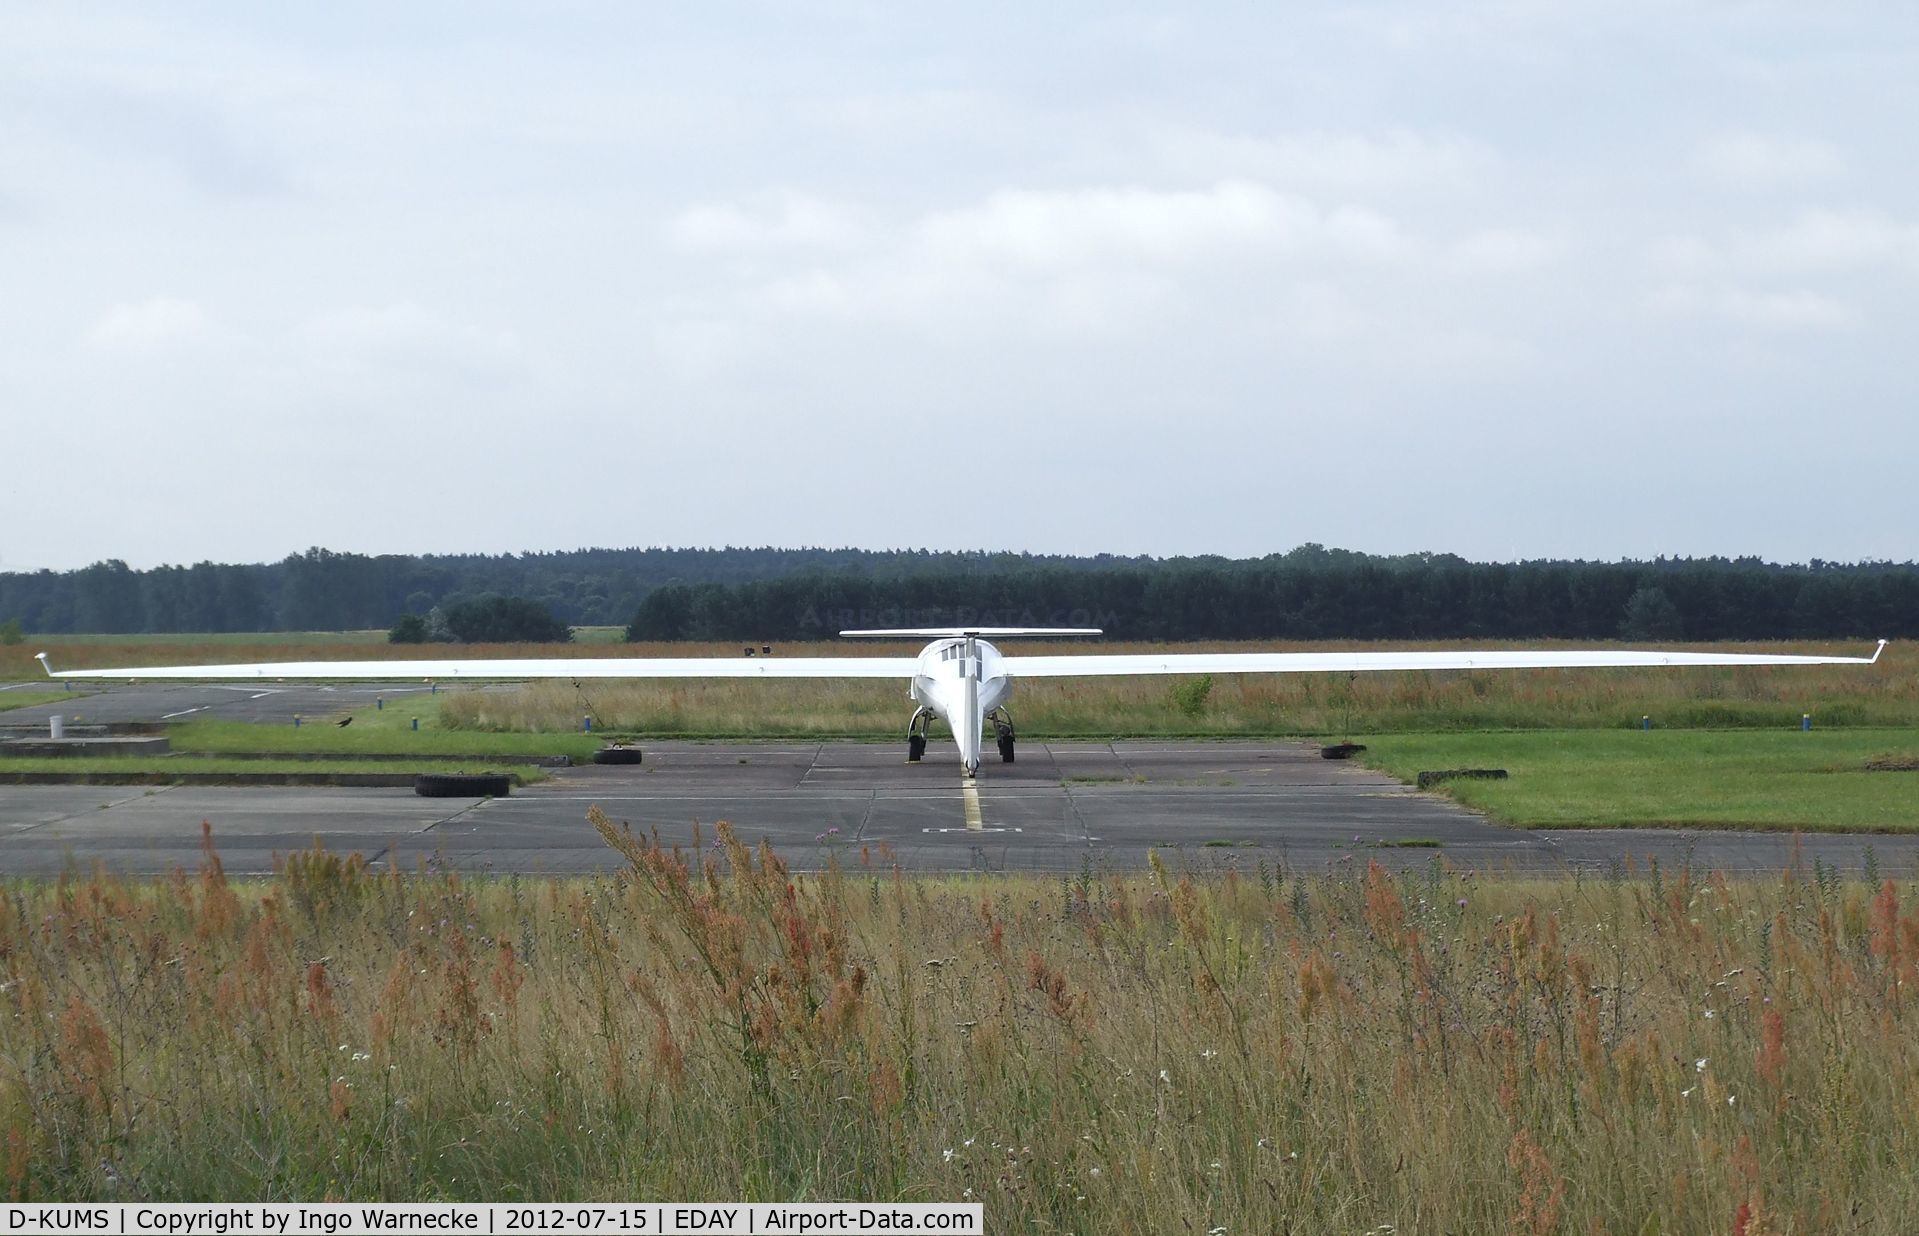 D-KUMS, Stemme S10 C/N Not found D-KUMS, Stemme S-10 at Strausberg airfield